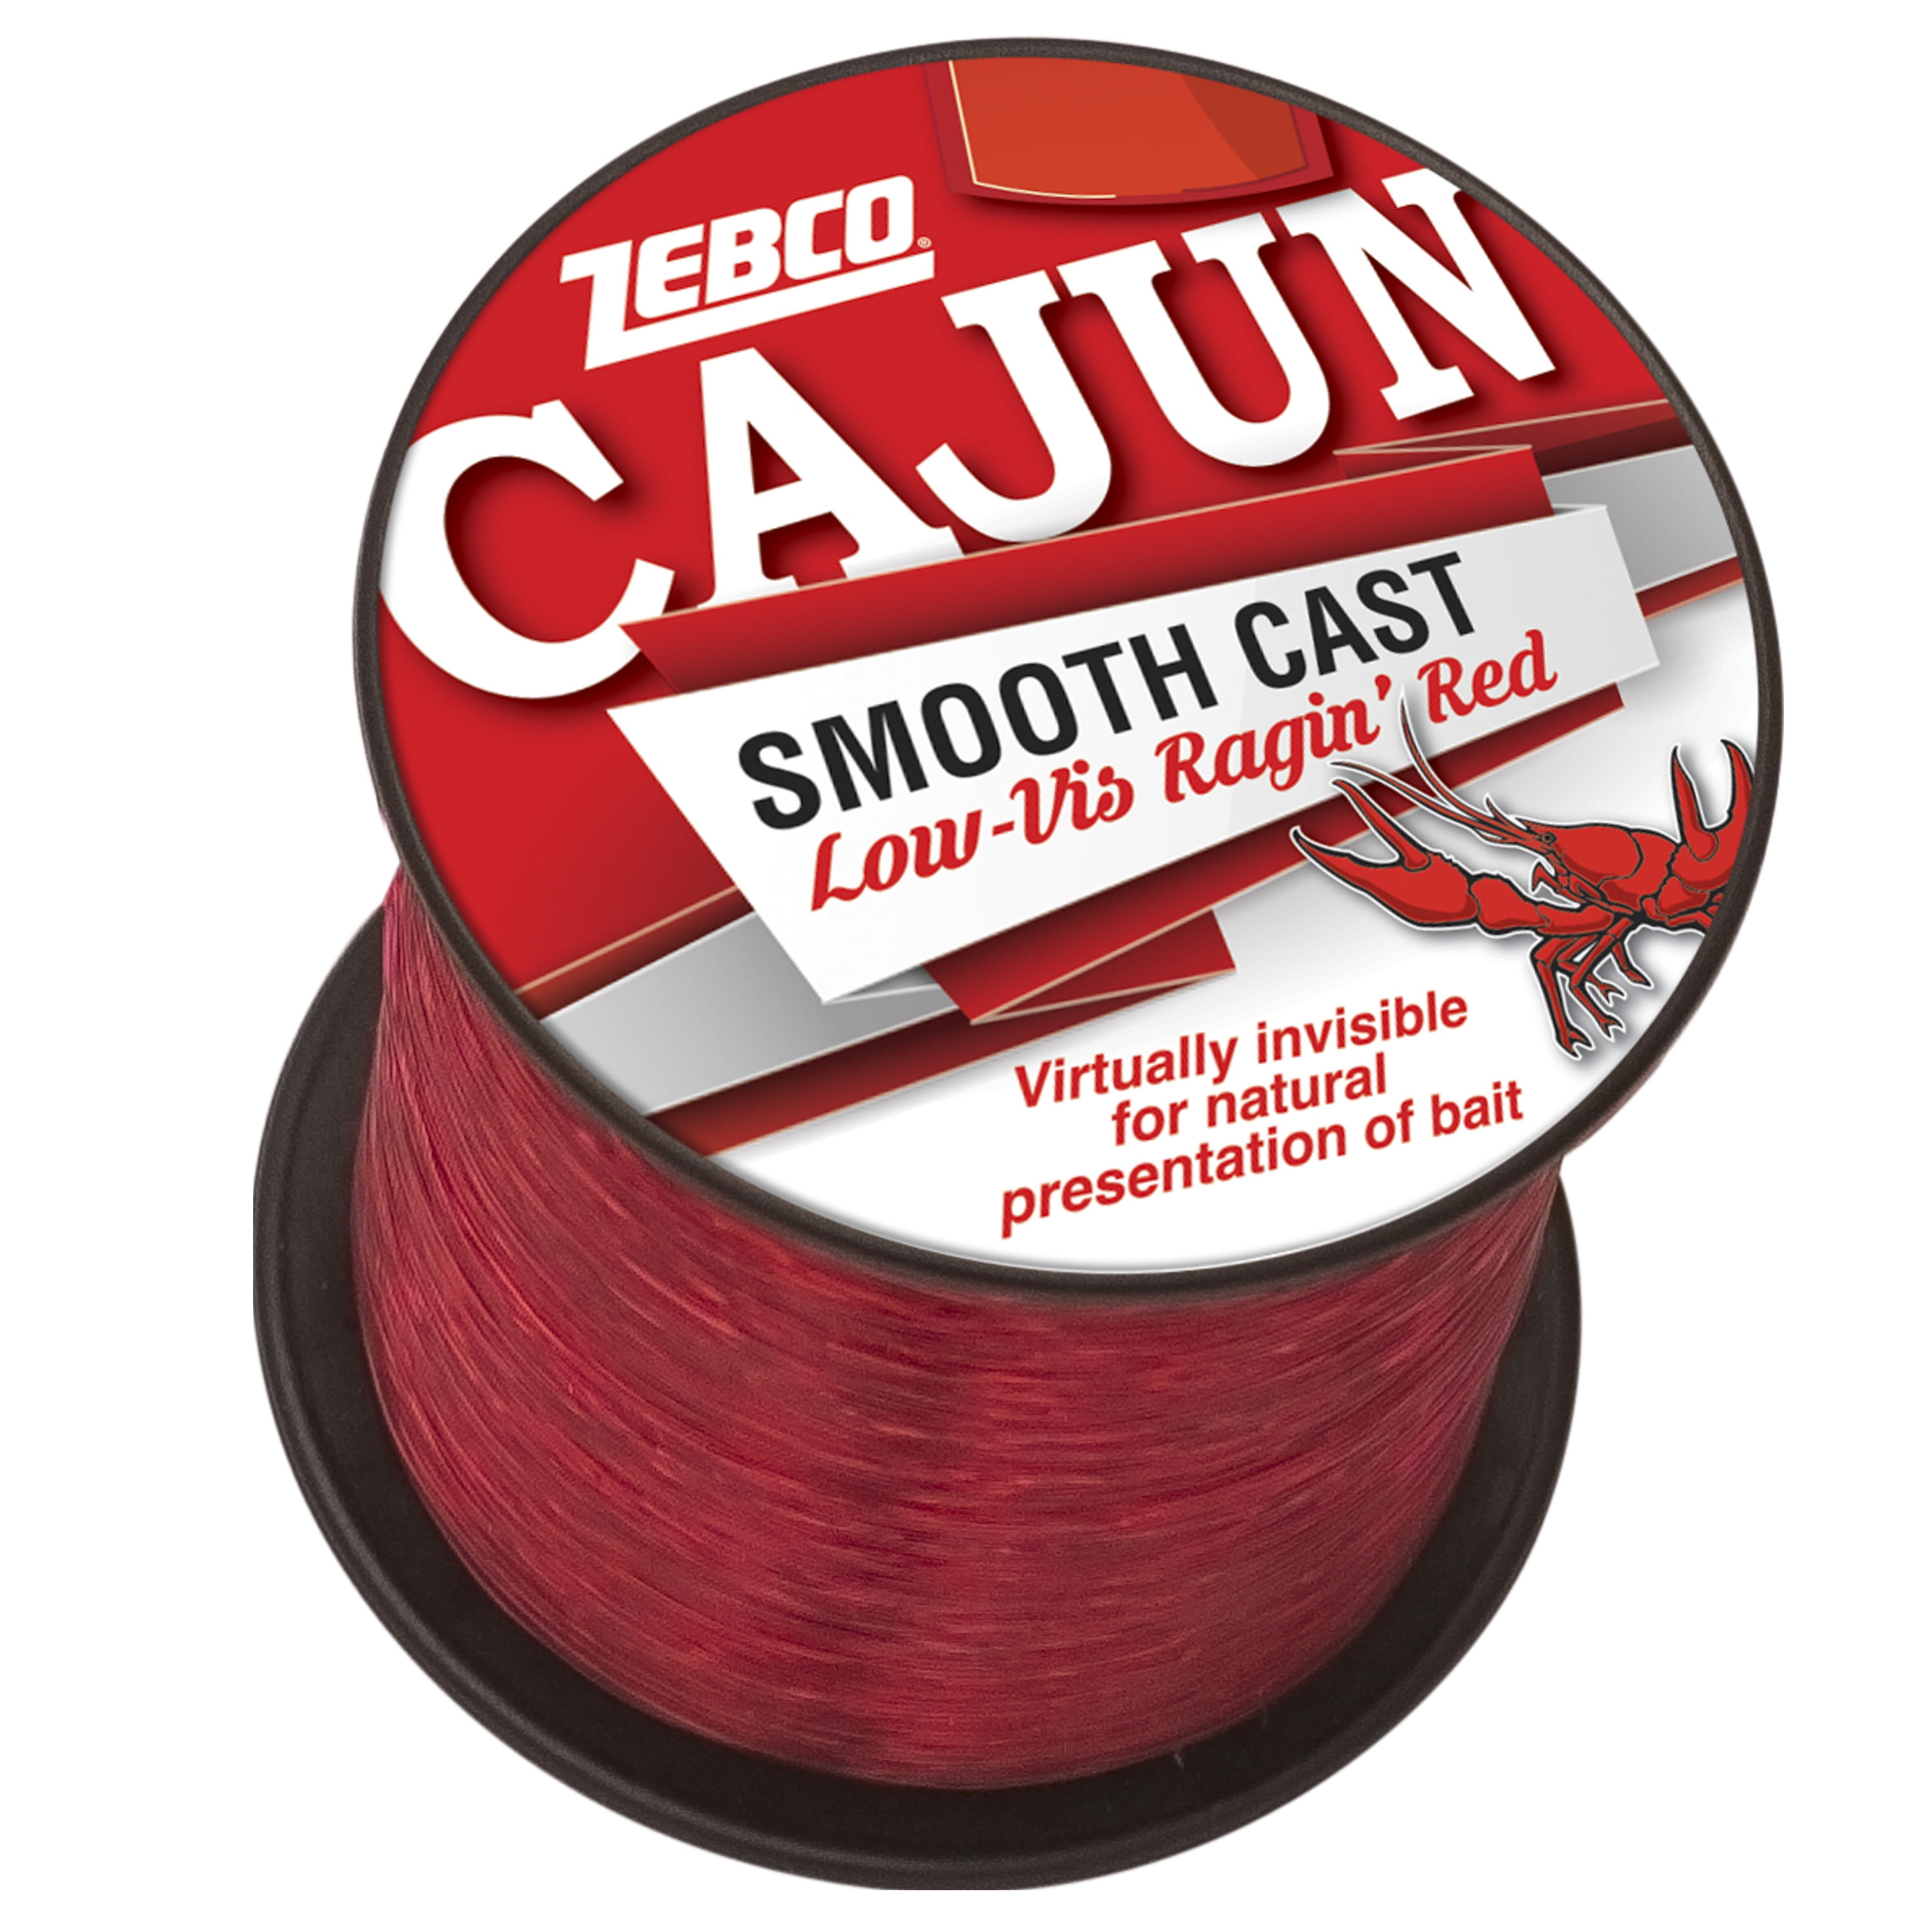 Zebco Cajun Line Smooth Cast Fishing Line, Low Vis Ragin' Red, 40-Pound  Tested 